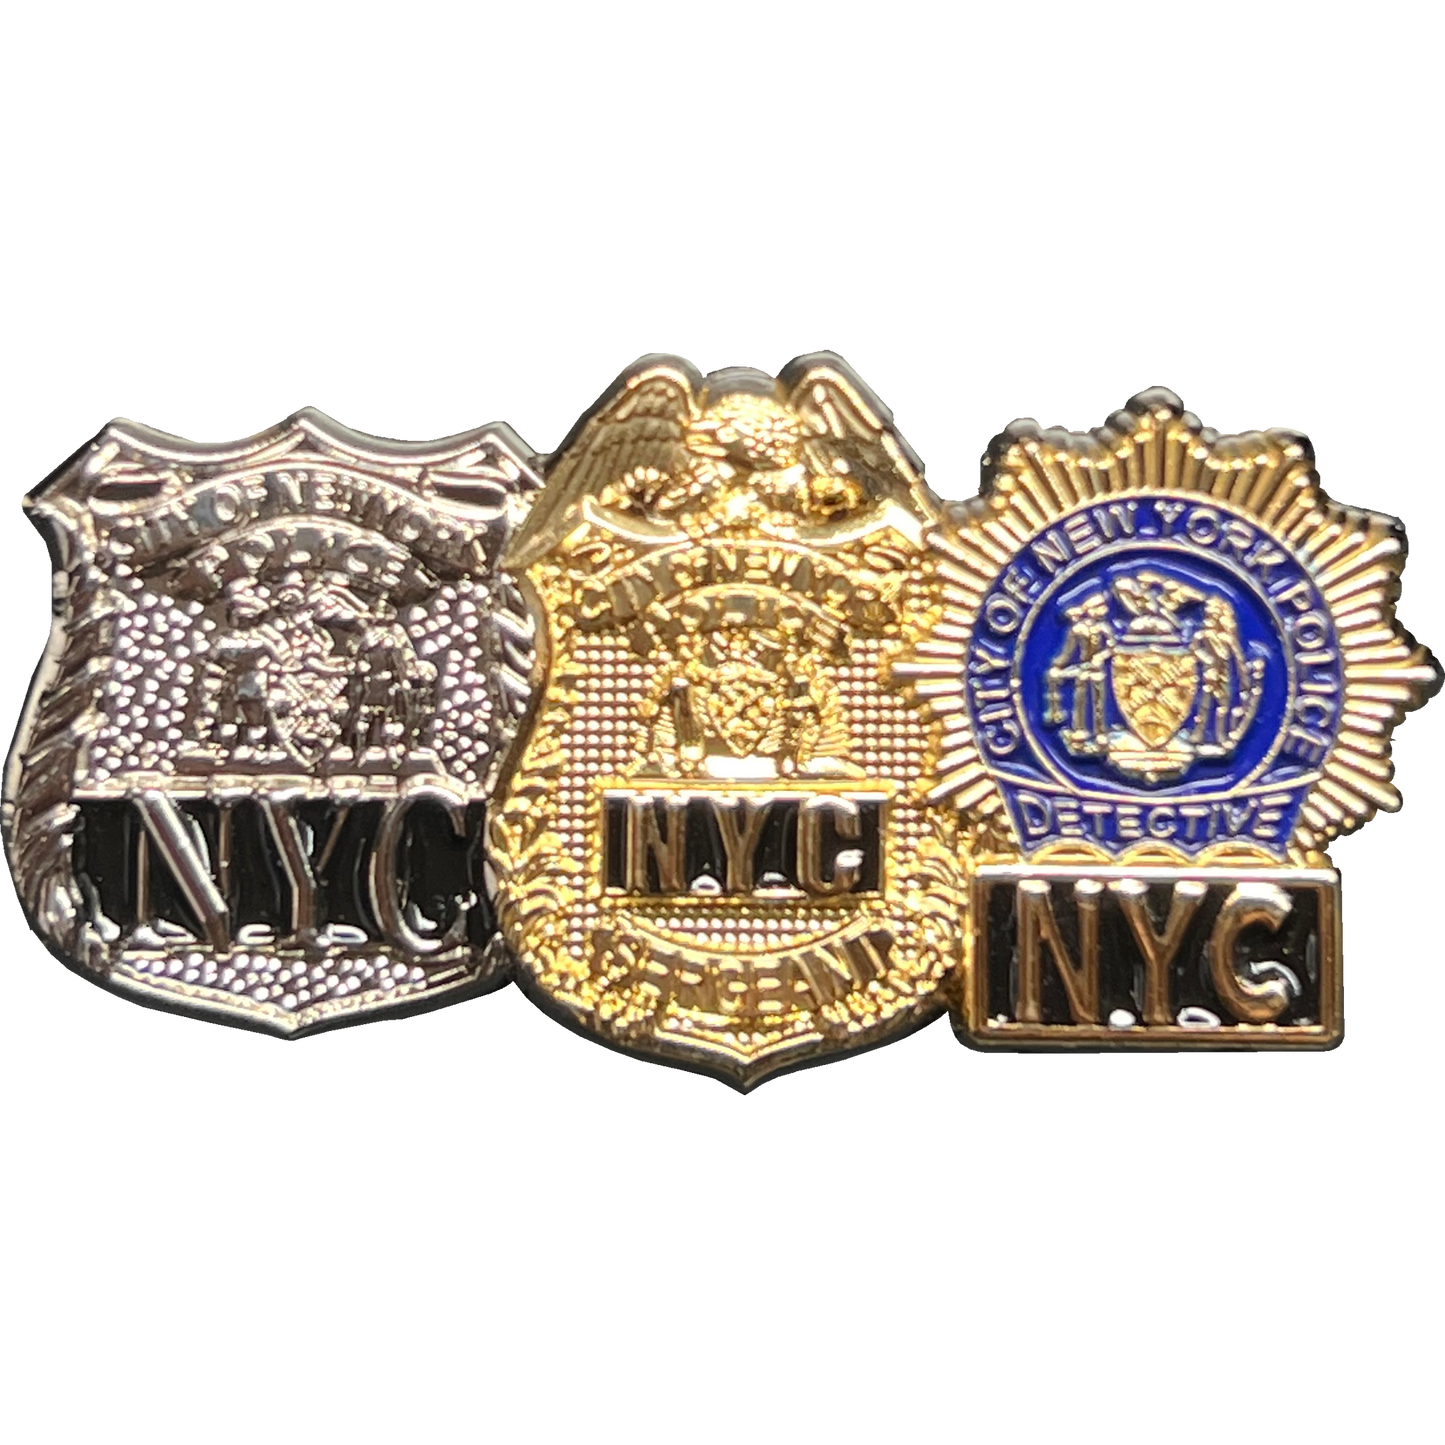 GL15-001 NYPD Officer Sergeant Detective Lapel Pin dual plated 3D top quality